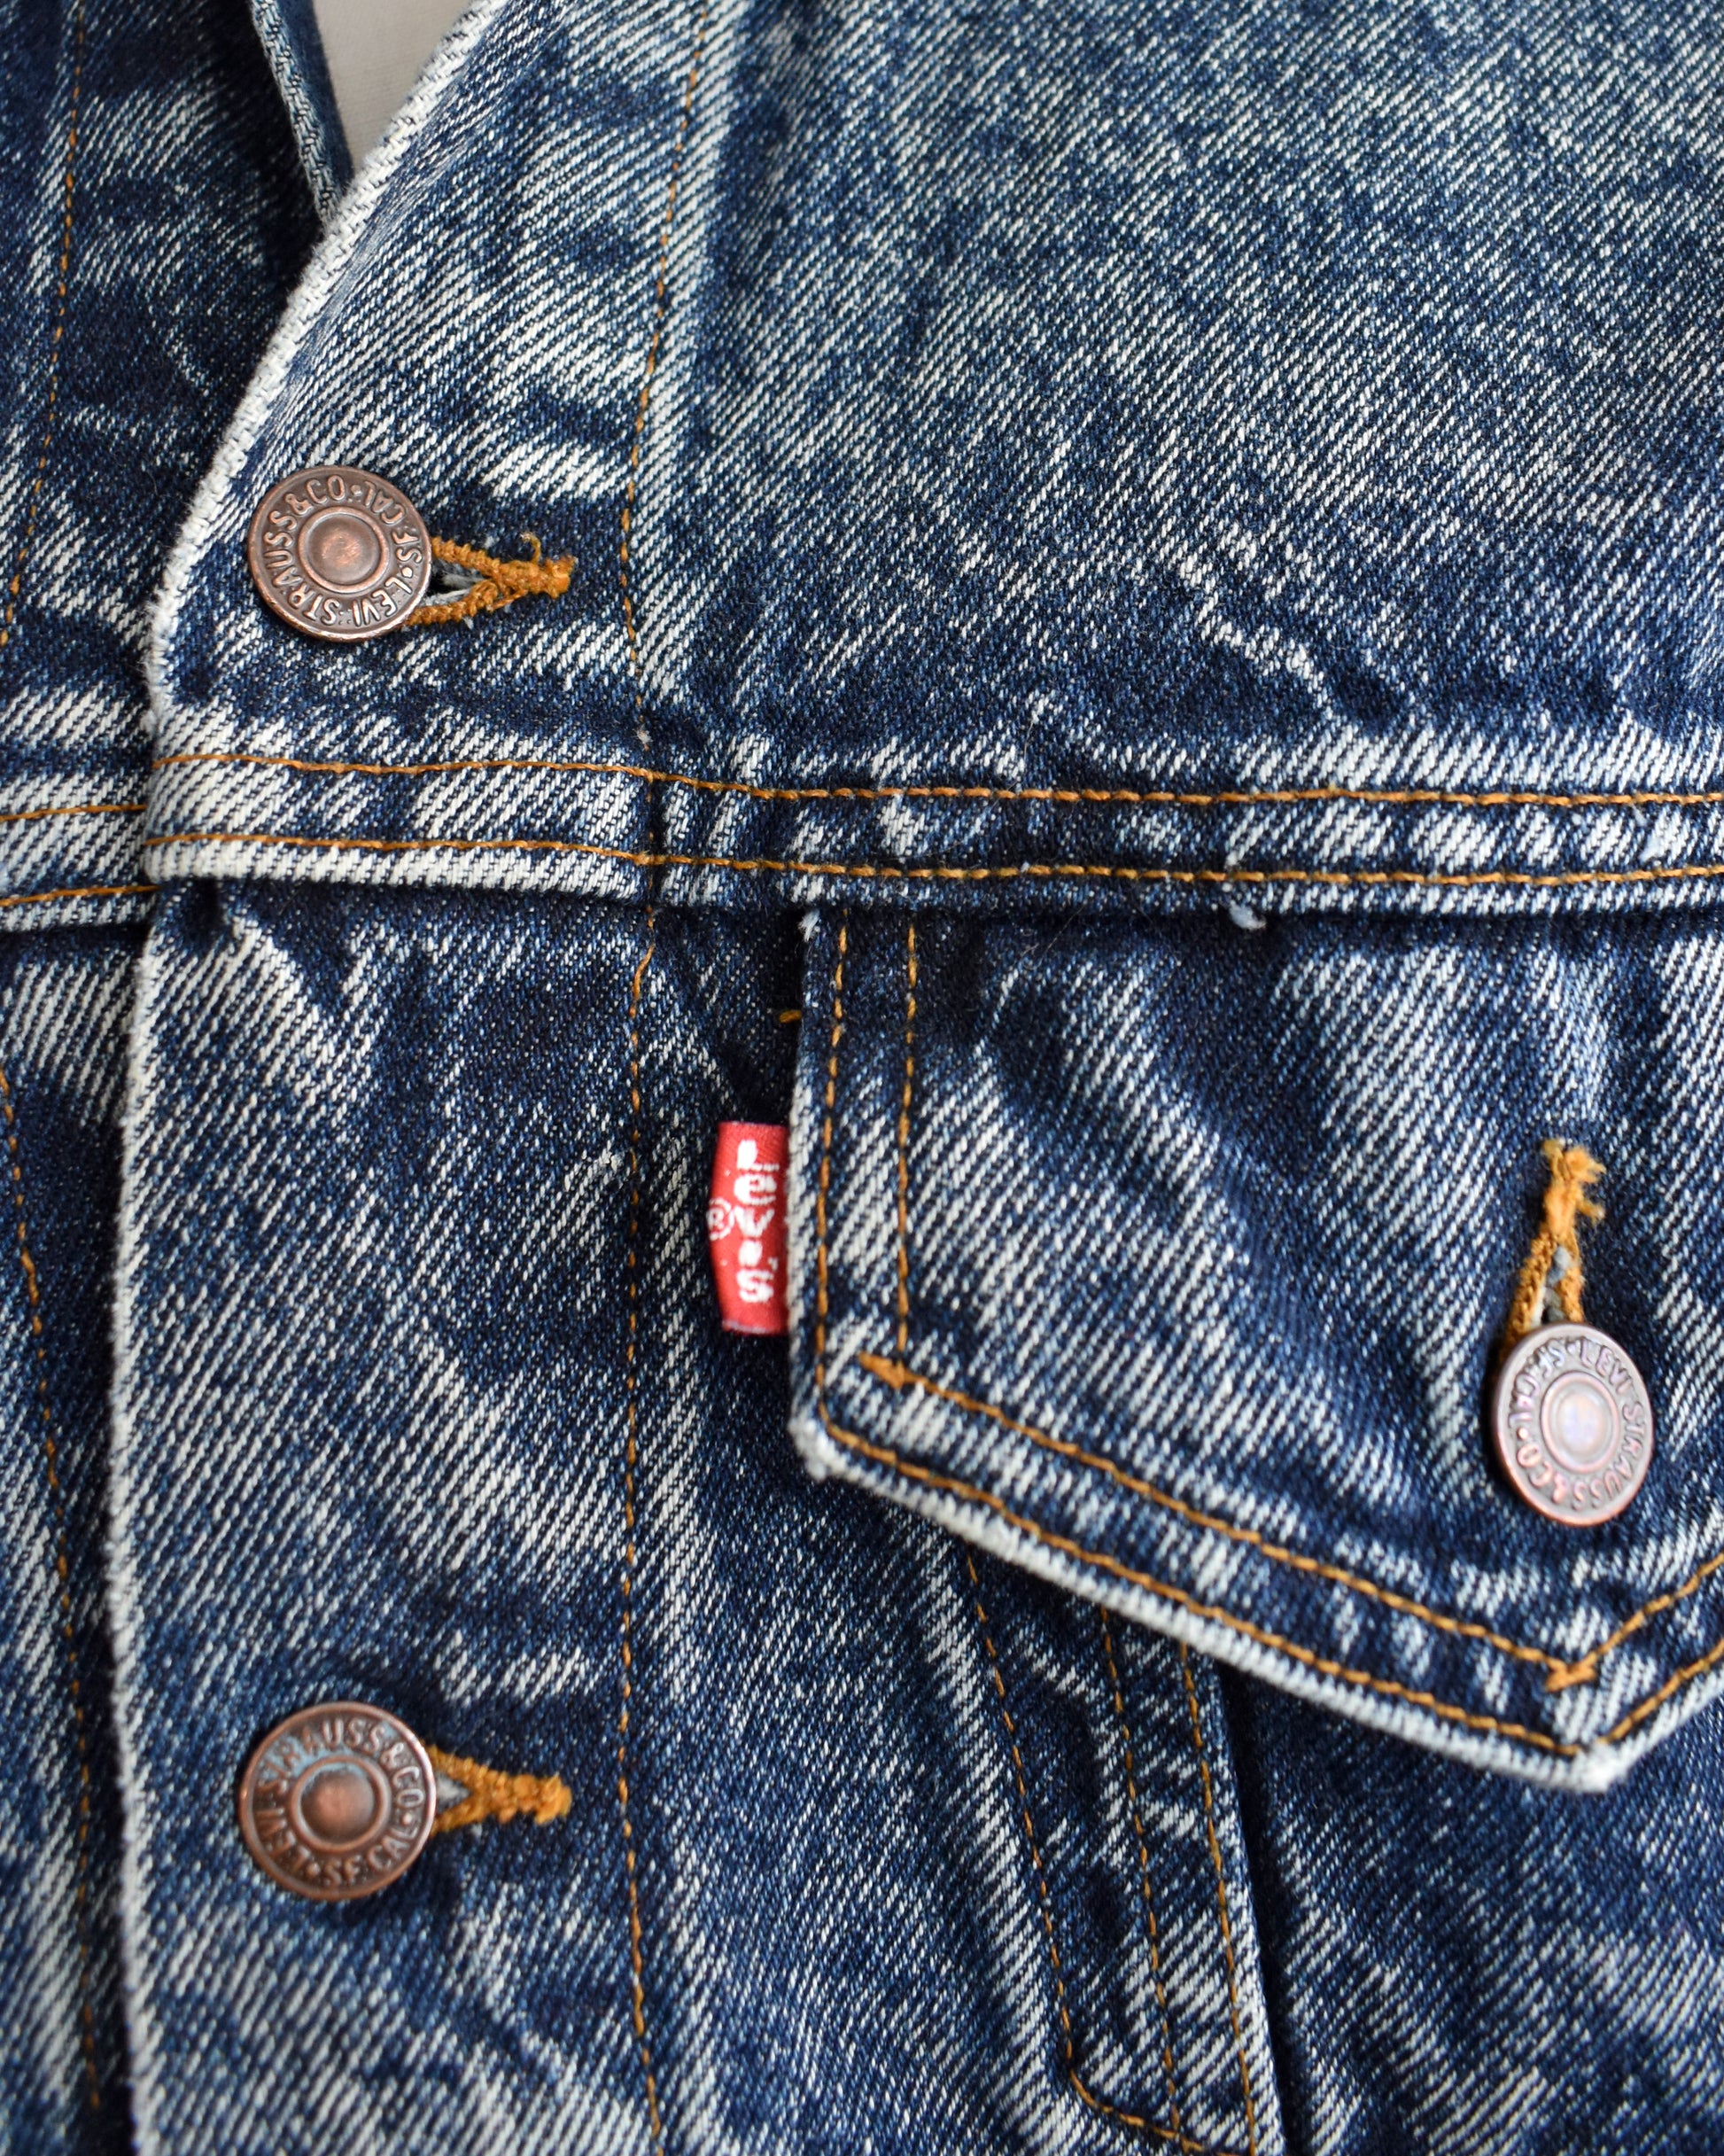 Close up of the iconic red Levis tag and chest pocket